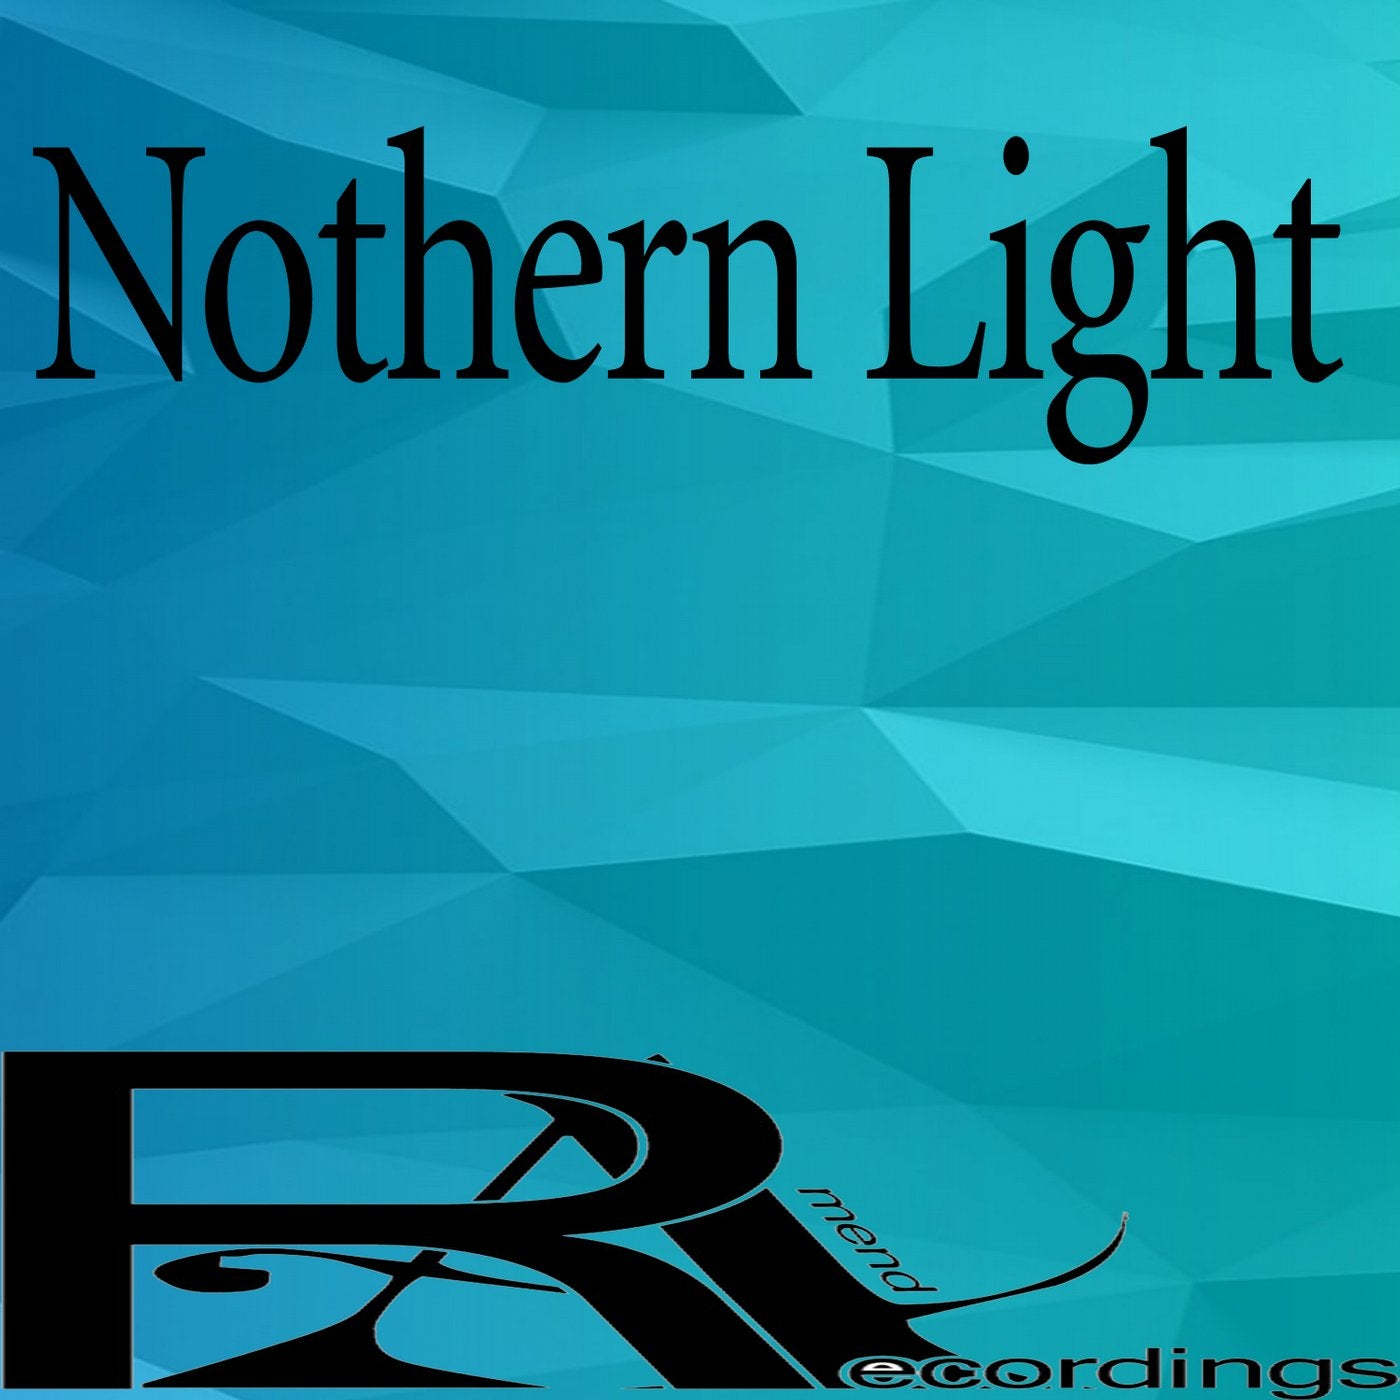 Nothern Light